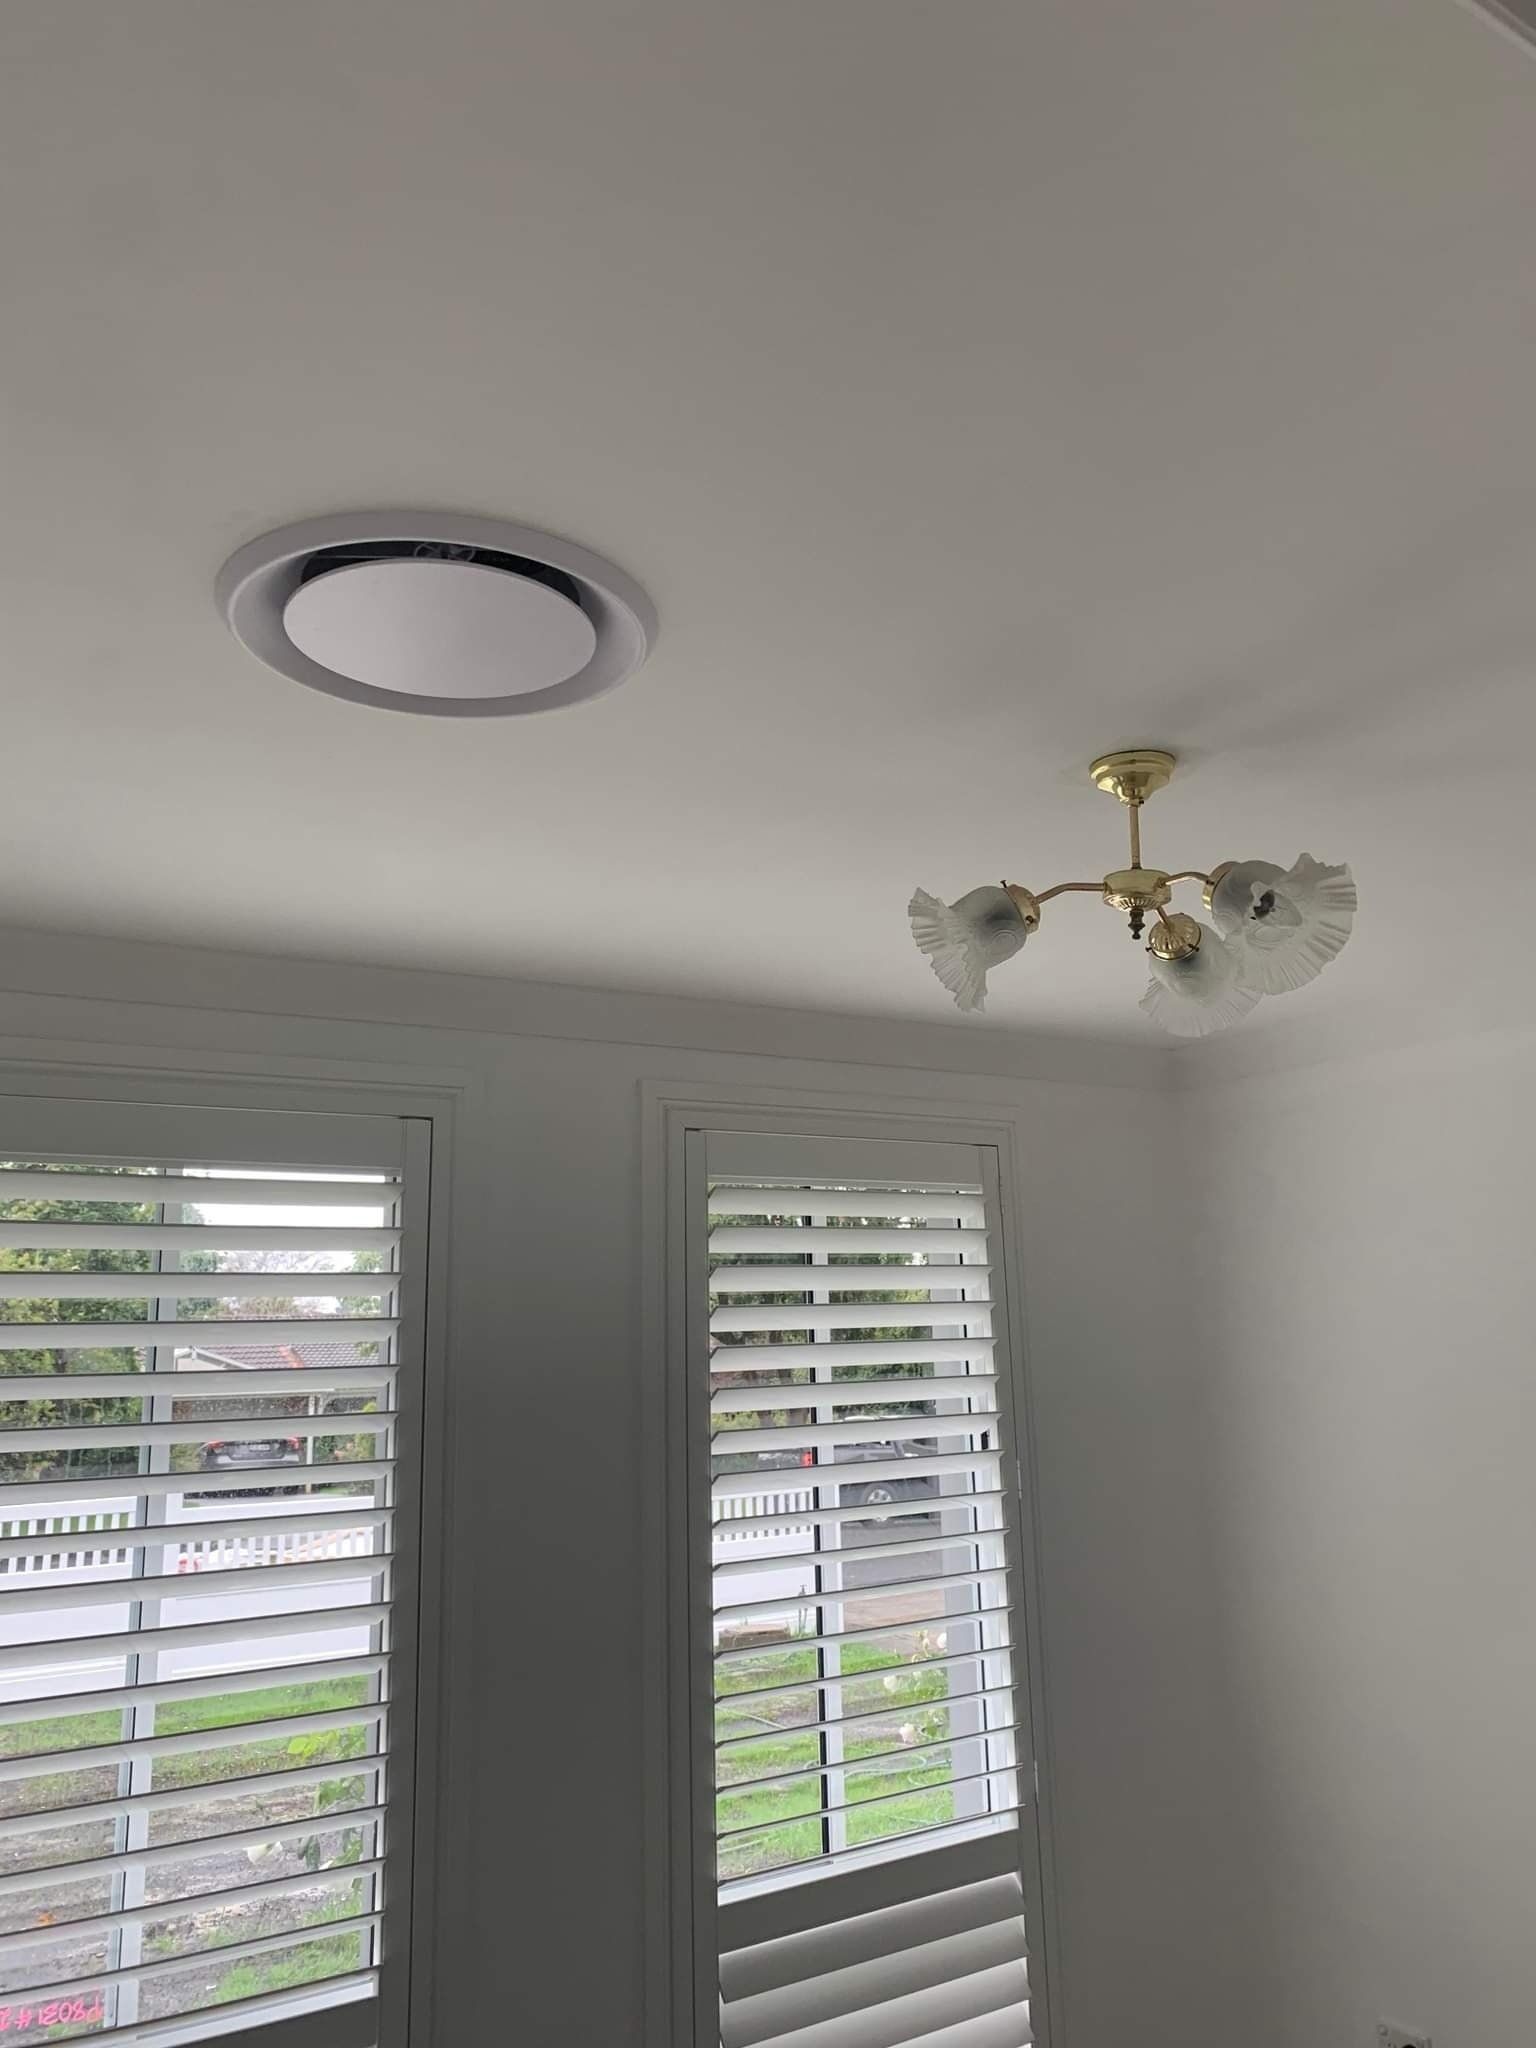 Panasonic Premium Ducted System Installed — Air Conditioners in Illawarra, NSW